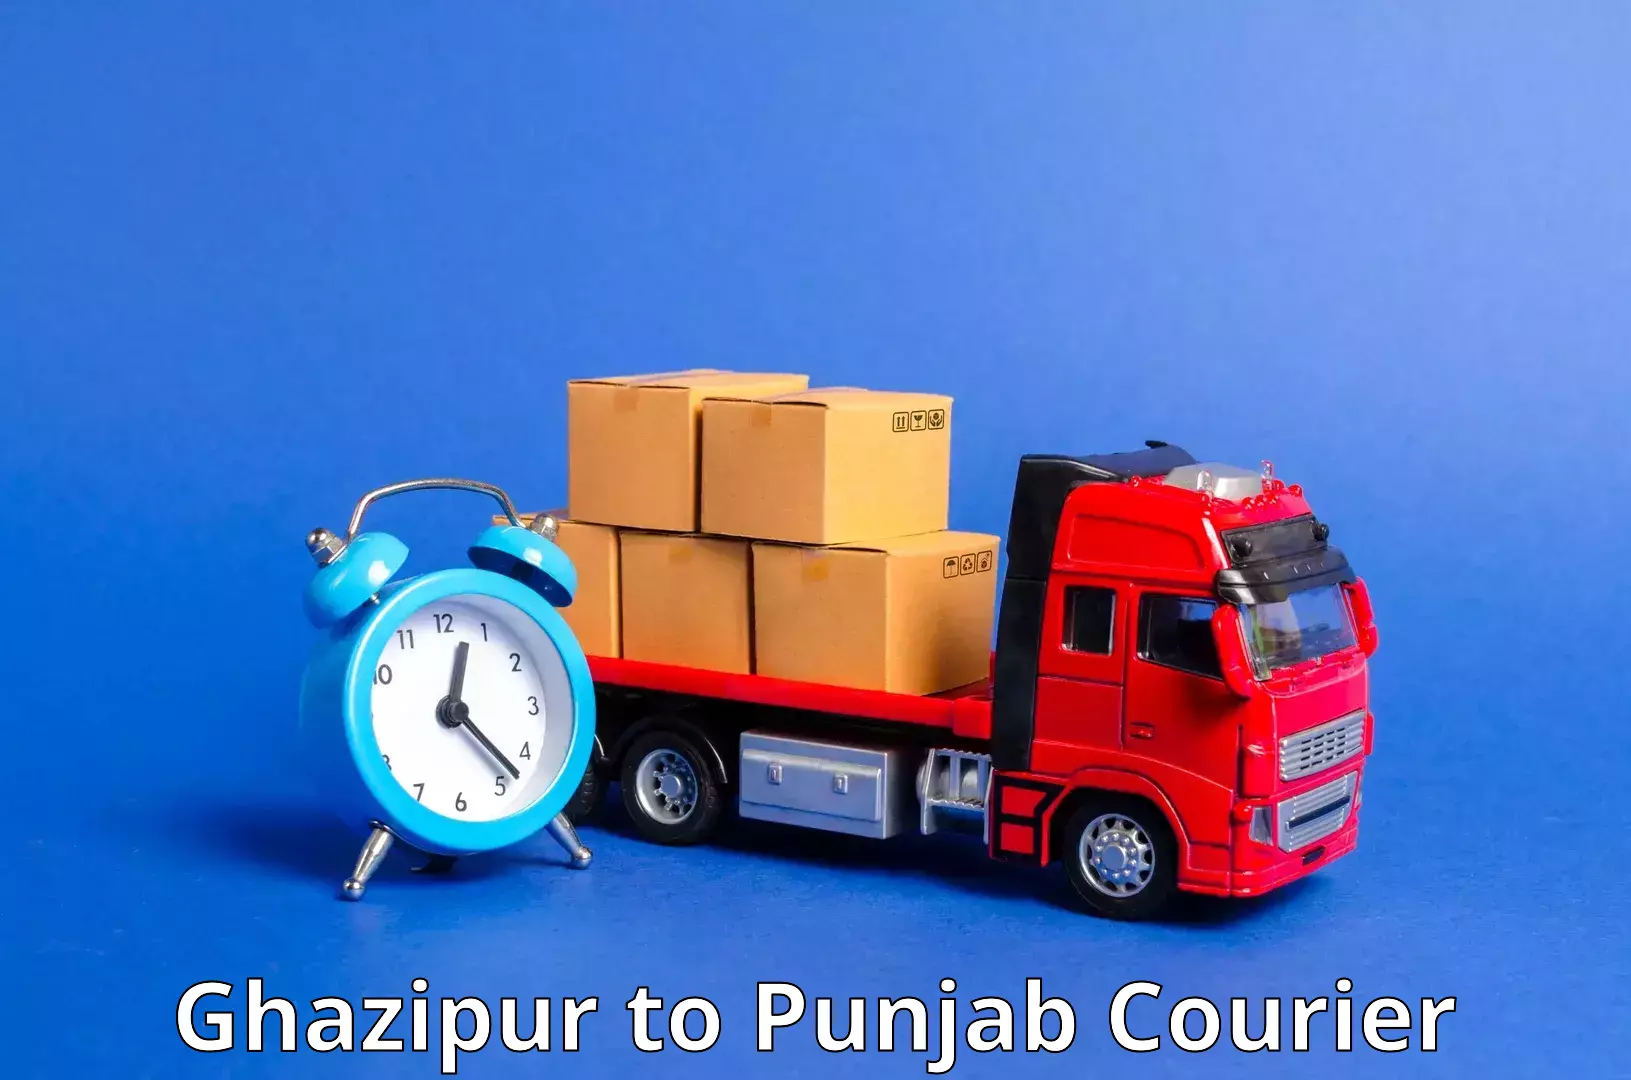 24/7 courier service Ghazipur to Abohar